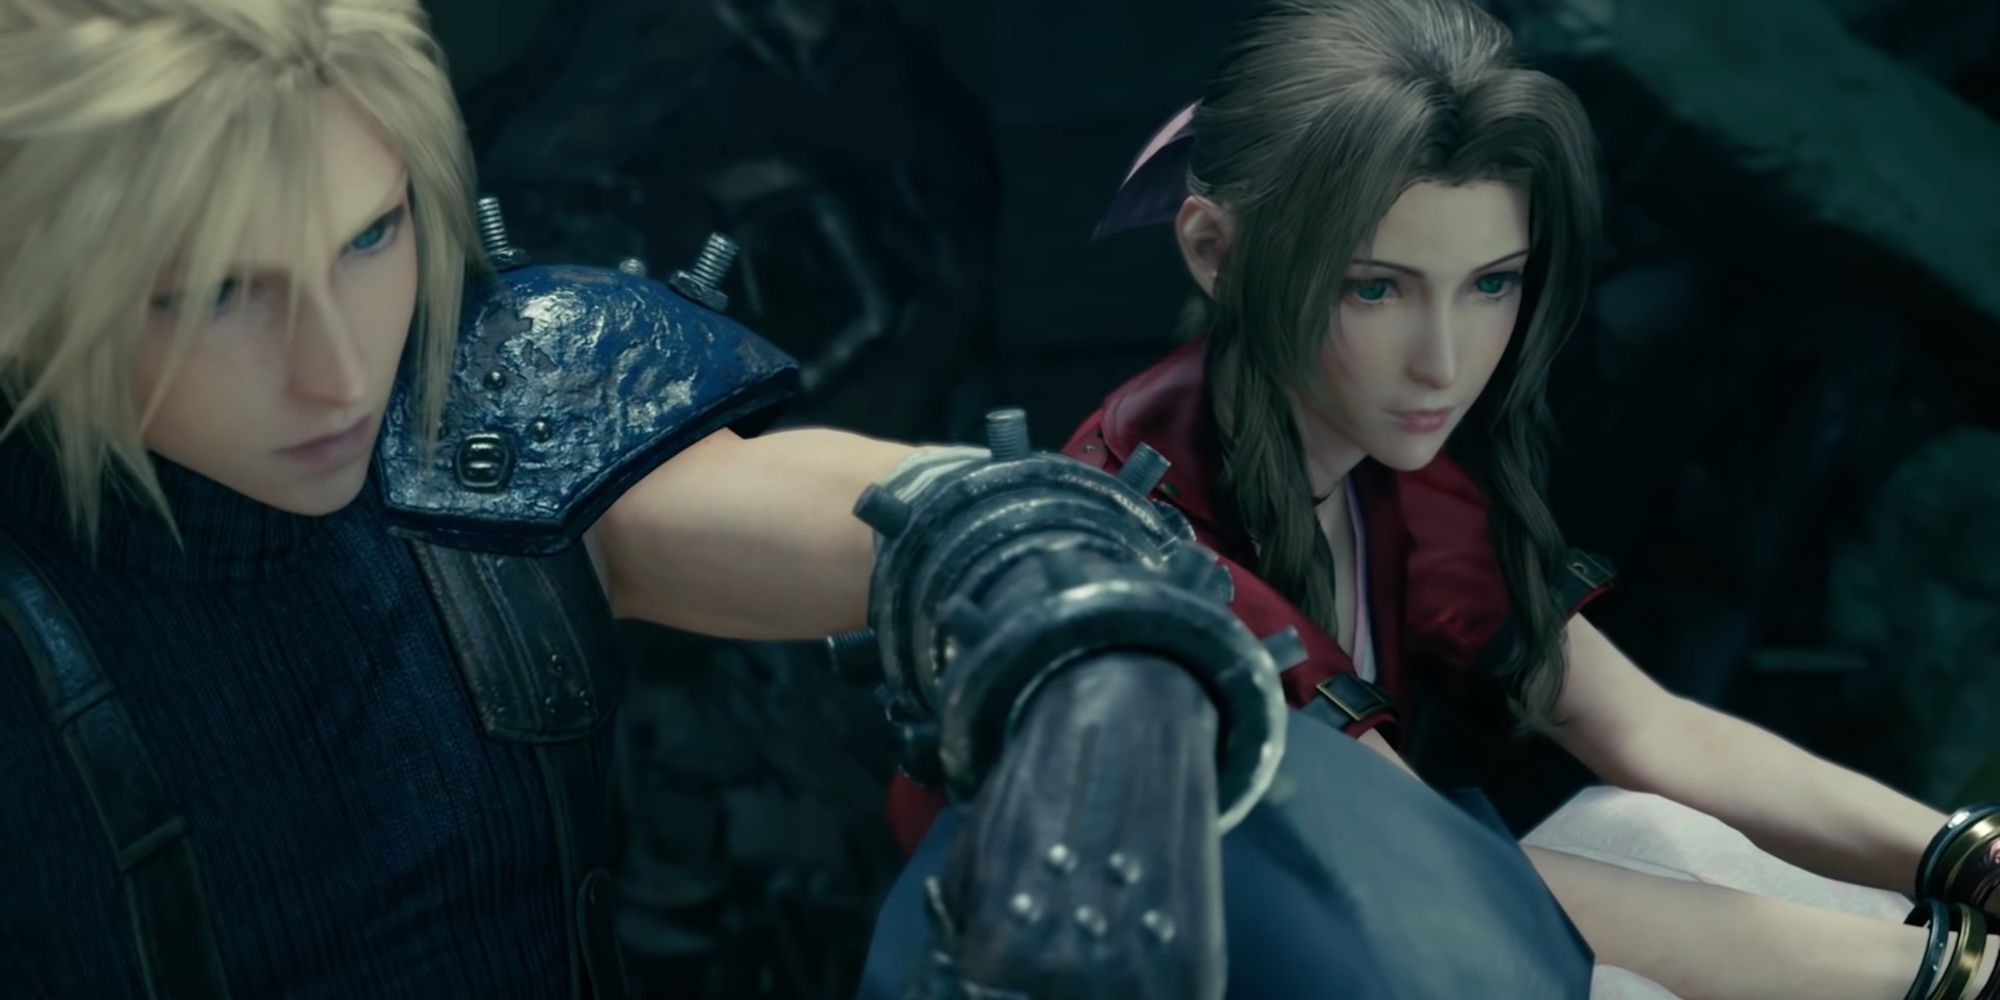 FF7: Cloud and Aerith